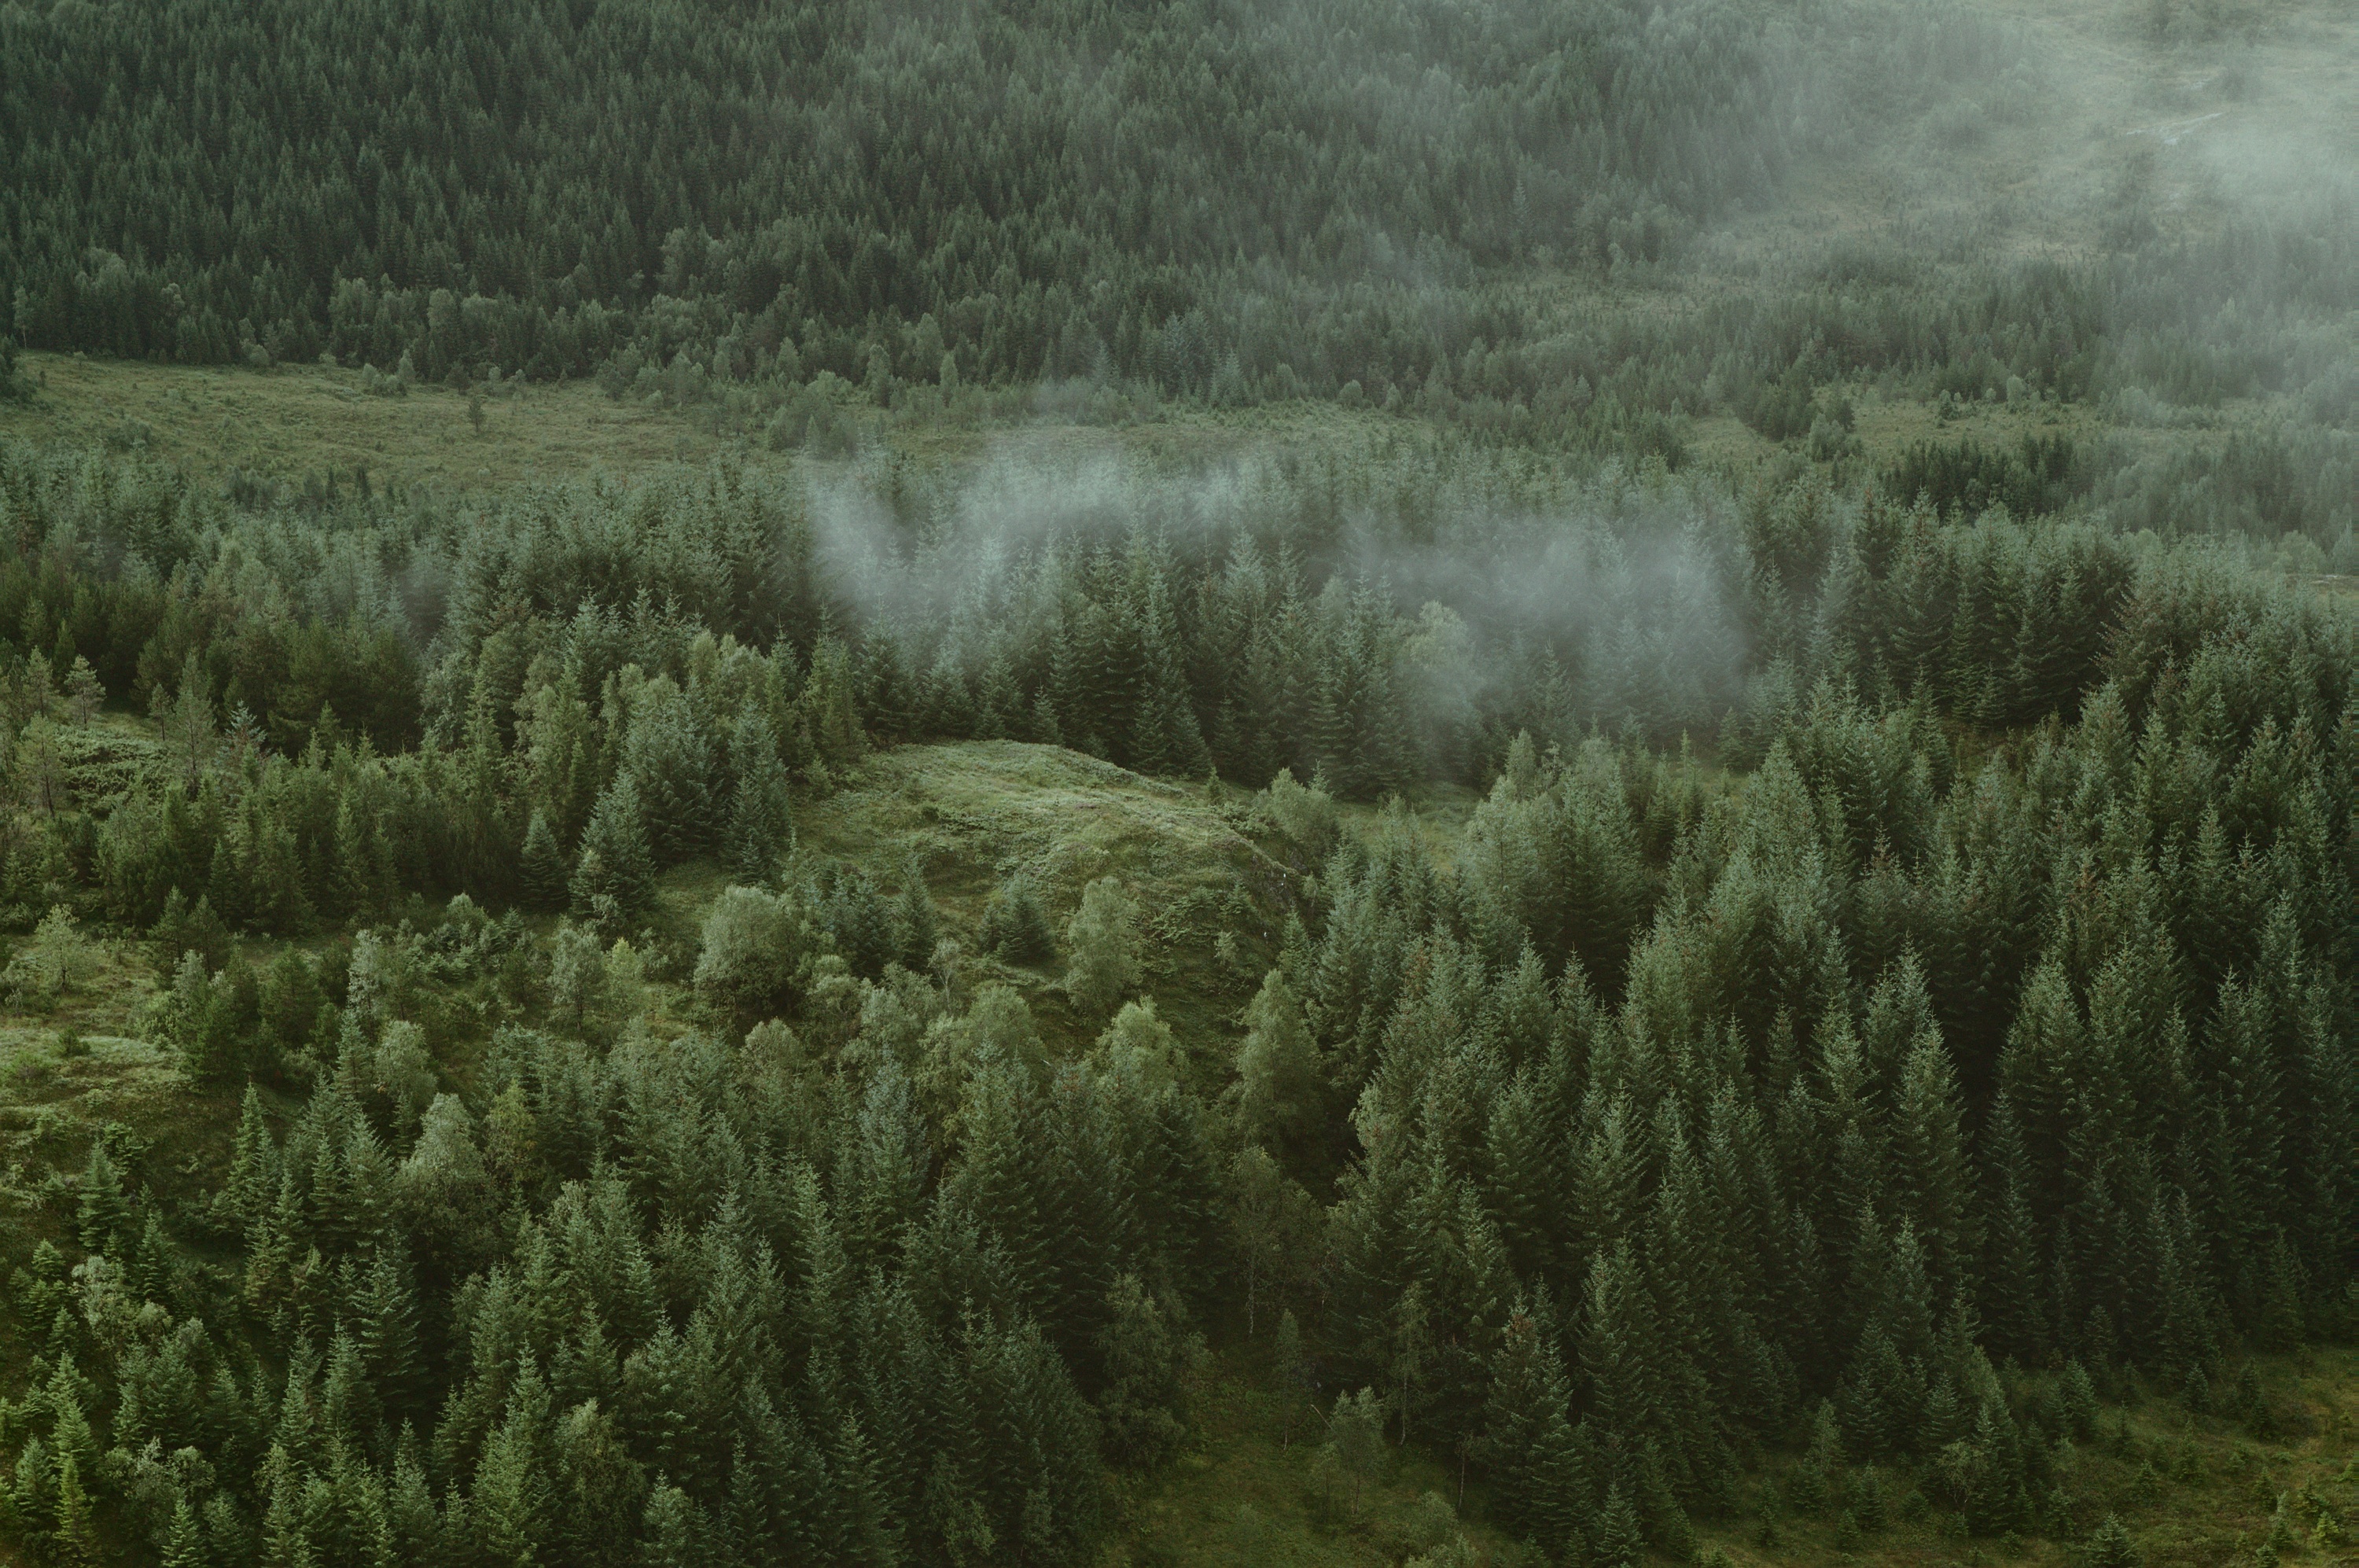 coniferous, view from above, nature, trees, clouds, forest, hills